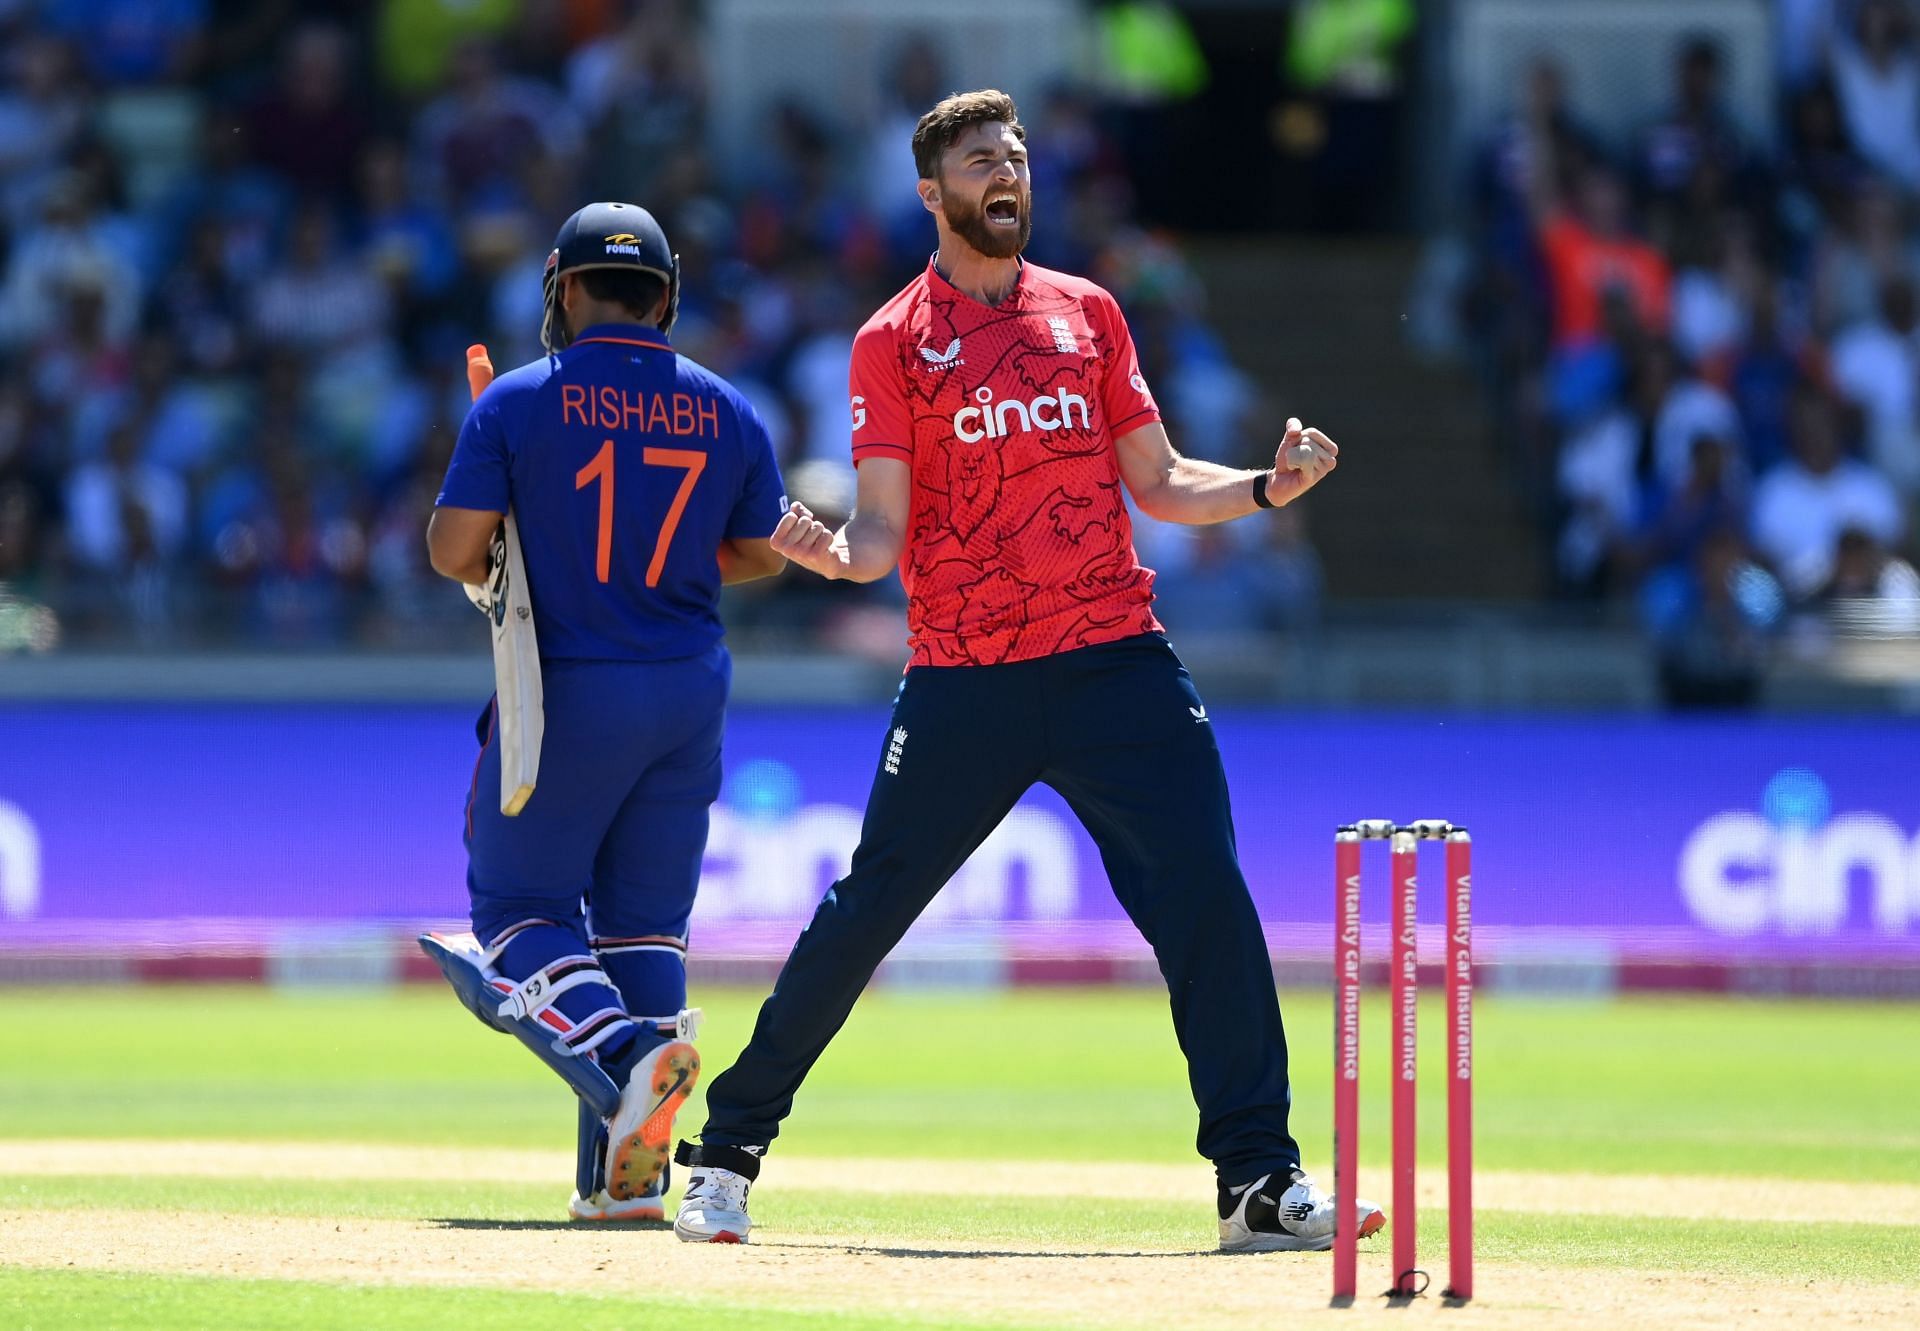 Rishabh Pant has had to deal with massive scrutiny since his debut.